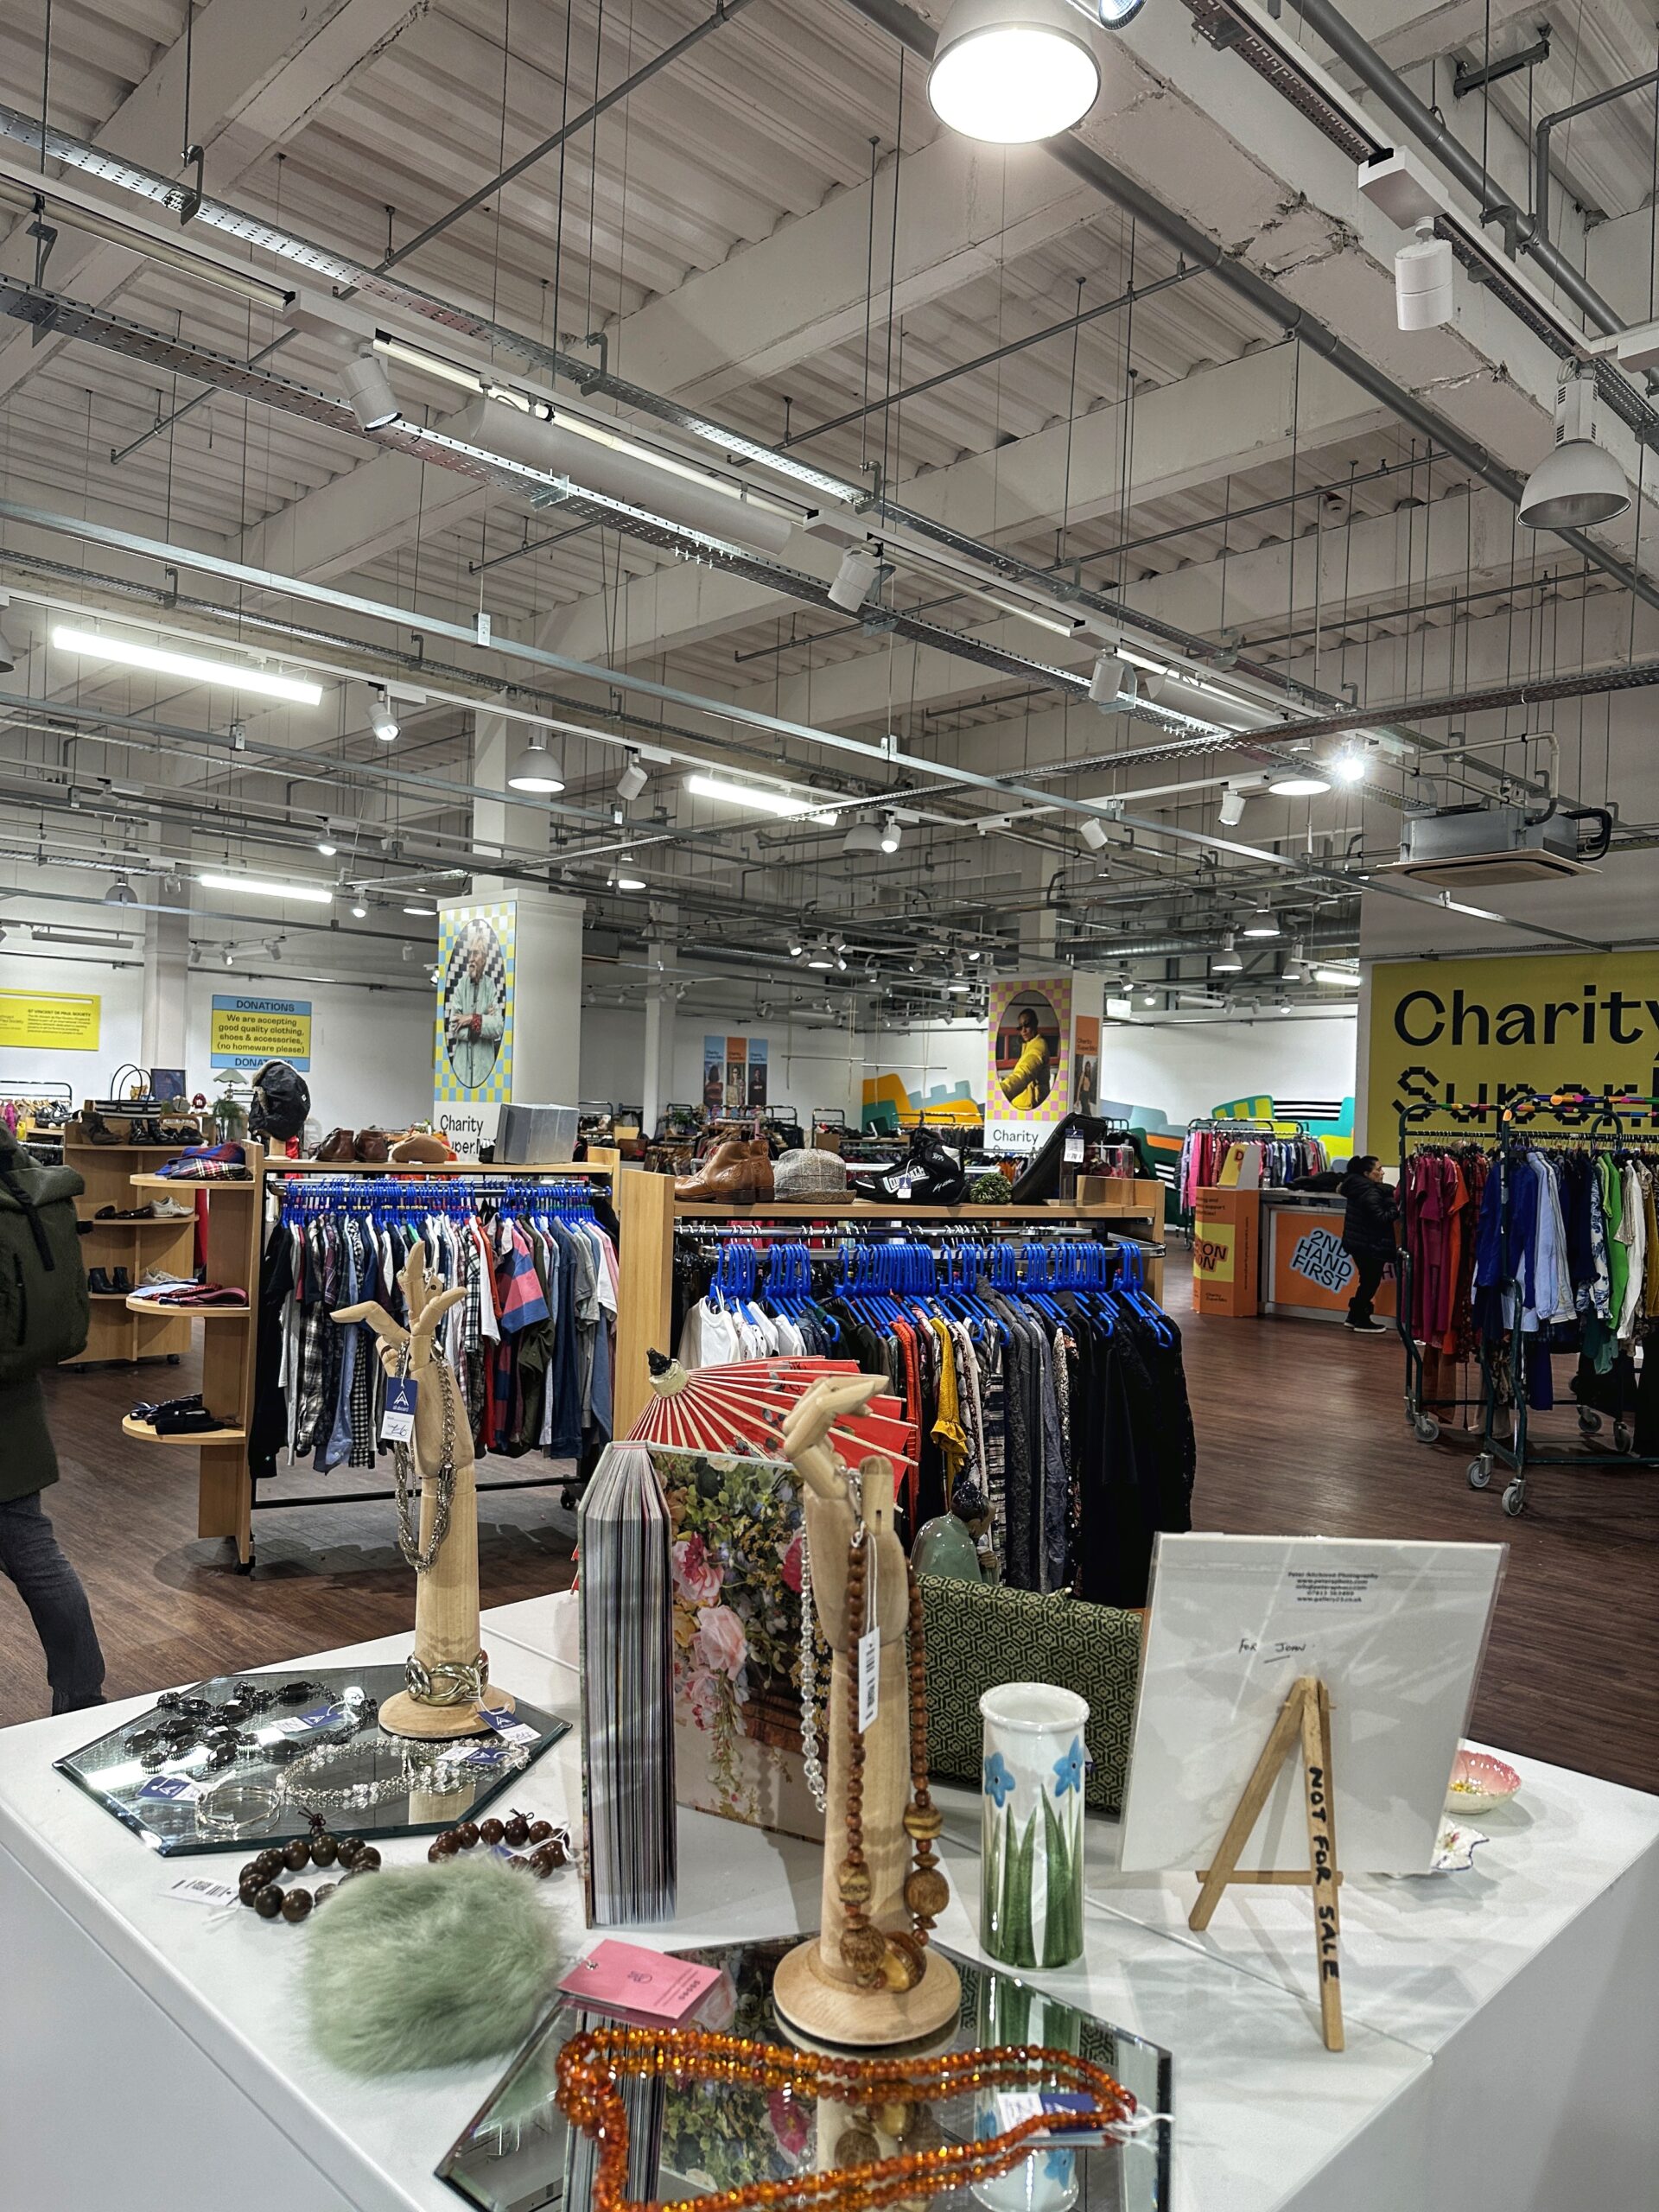 Inside Charity Super.Mkt in Salford Quays